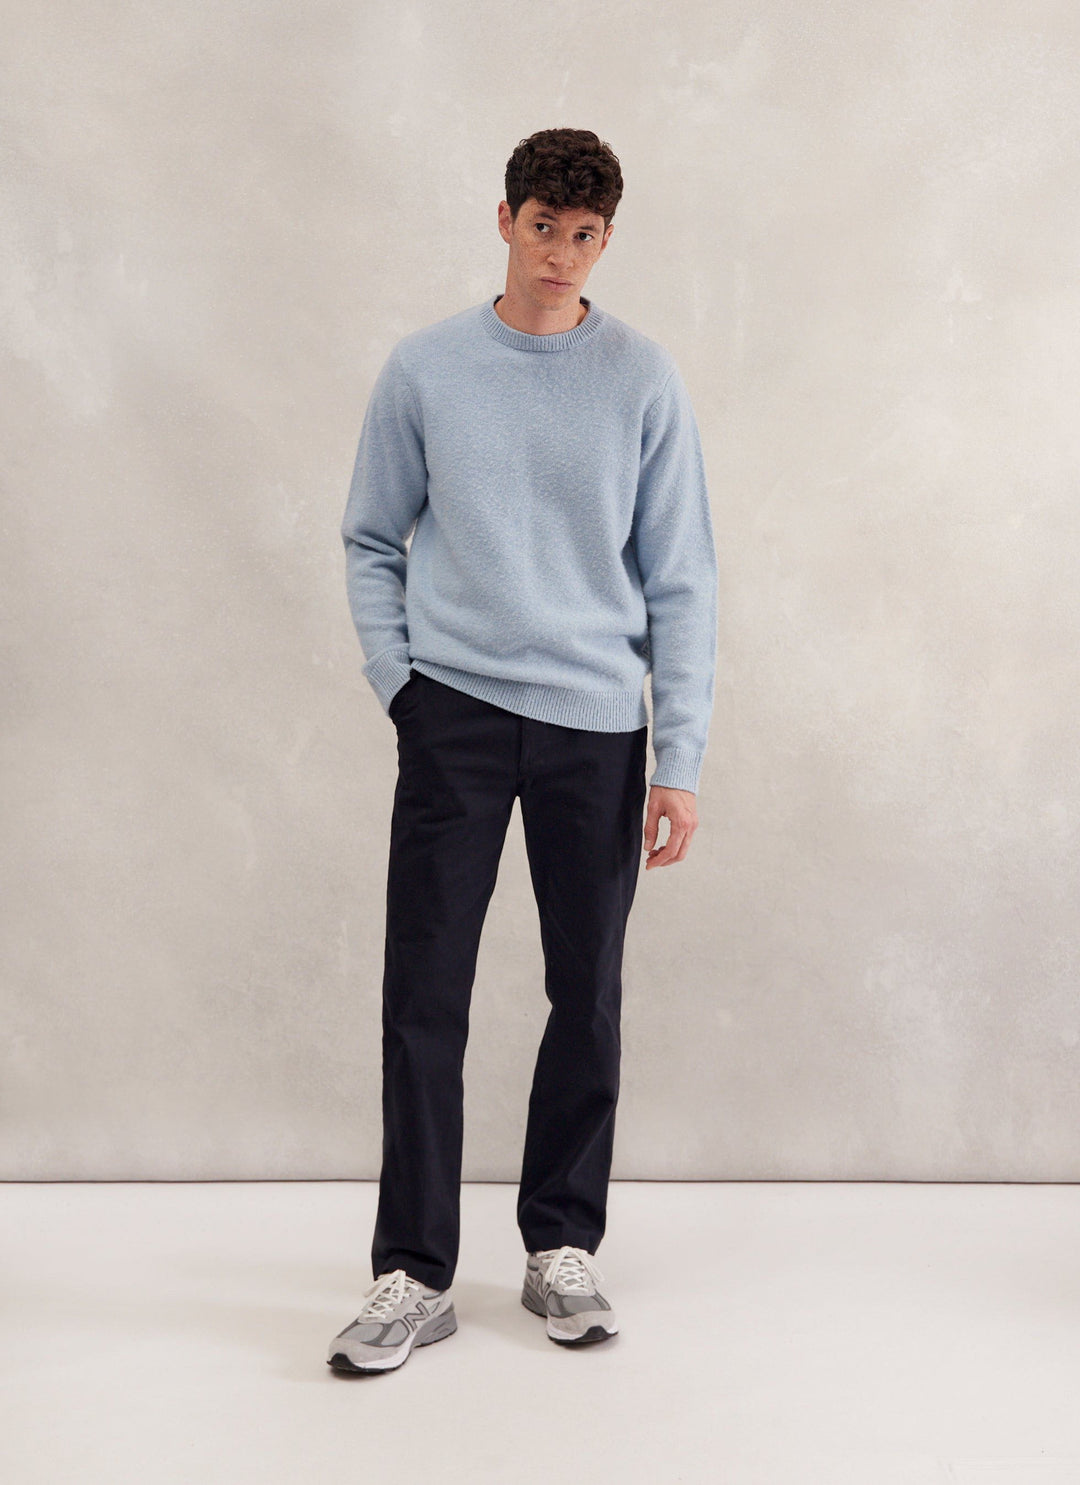 Men's Crew Neck Sweater | Brushed Wool Sweater | Sky Blue & Percival ...